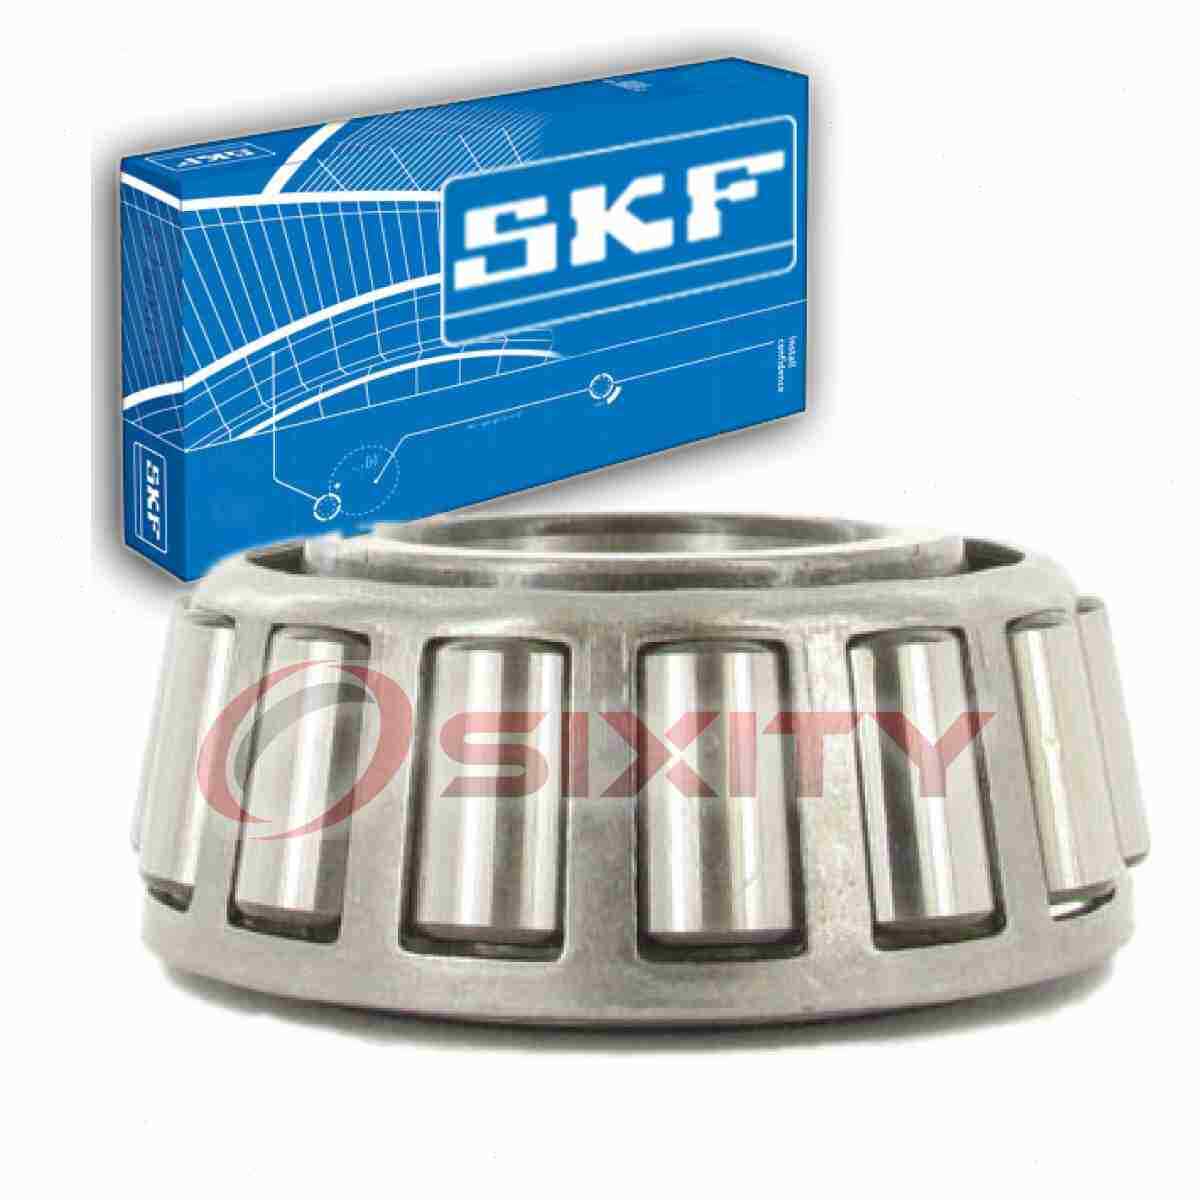 SKF Front Outer Wheel Bearing for 1967-1978 Oldsmobile Cutlass Supreme Axle tv